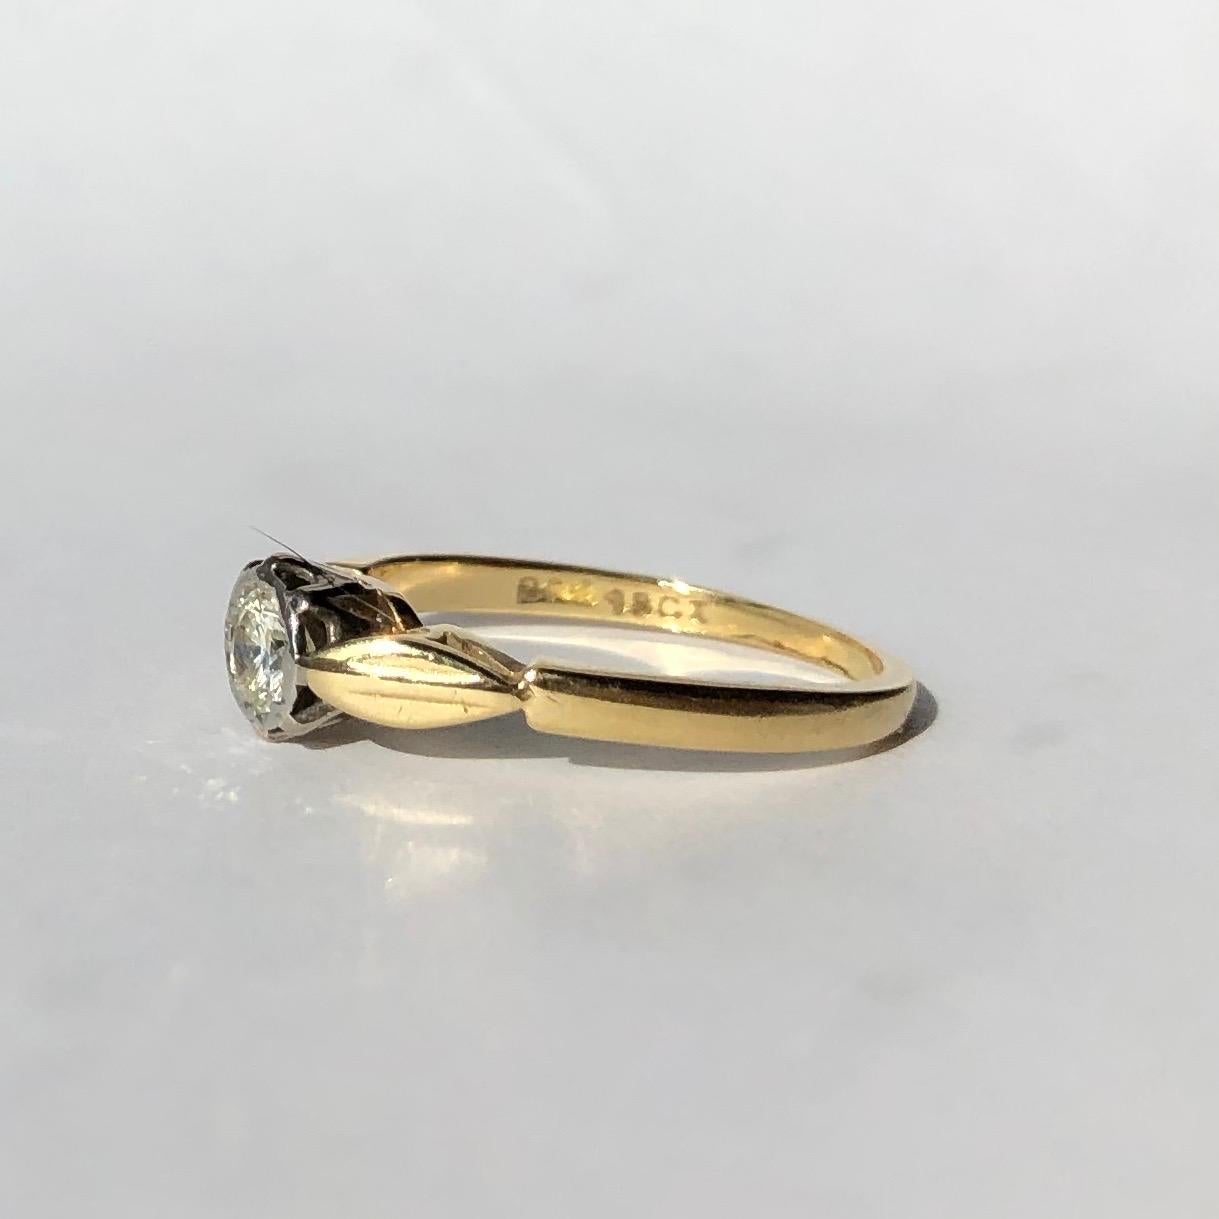 The design of the ring is so simple and beautiful. The diamond measures 35pts and is set in platinum. The shoulders feature leaf shaped detail modelled in 18ct gold. 

Ring Size: K or 5 1/4 
Height Off Finger: 4mm

Weight: 2.29g